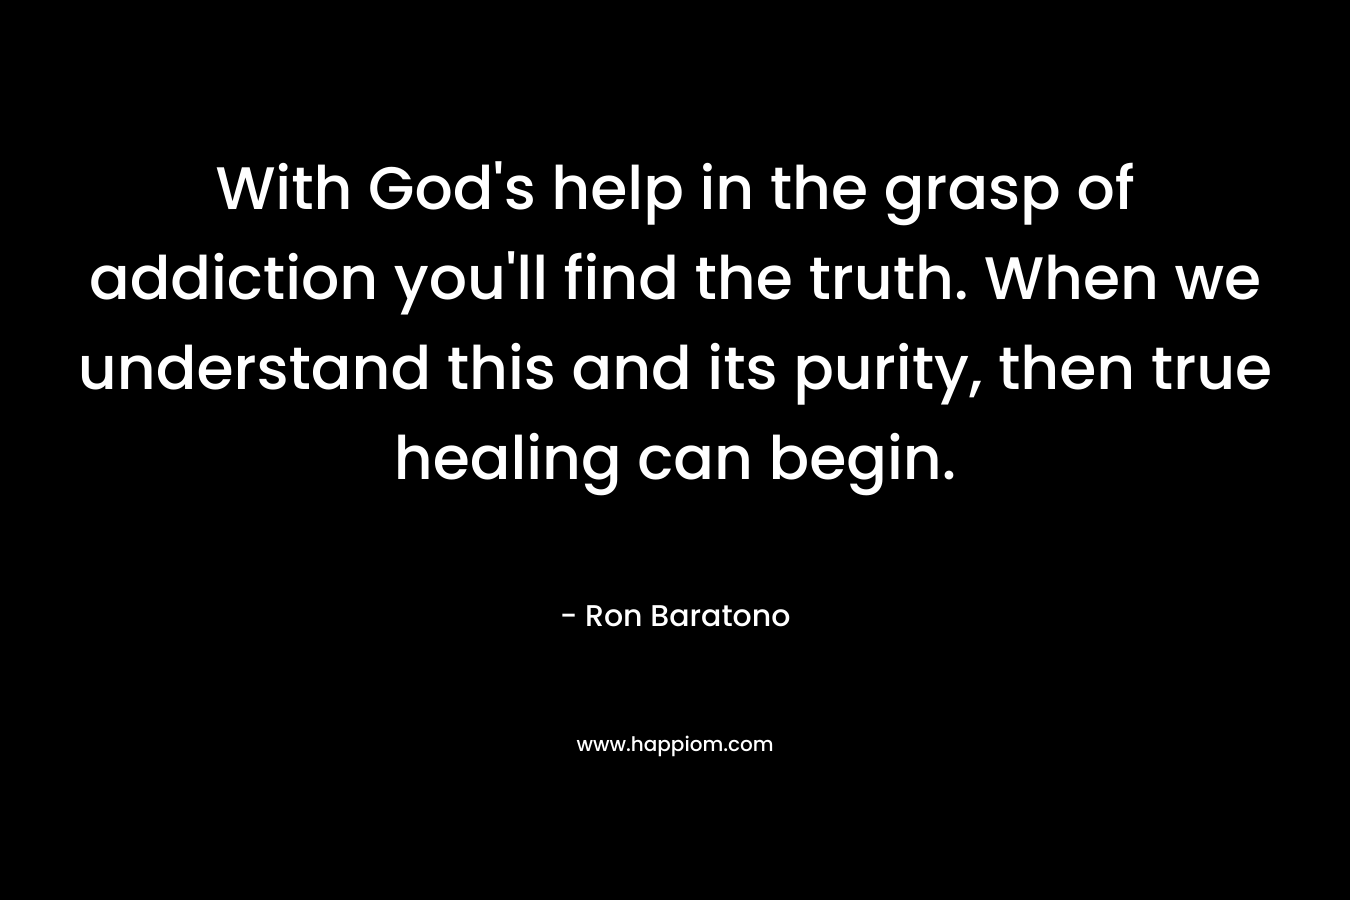 With God’s help in the grasp of addiction you’ll find the truth. When we understand this and its purity, then true healing can begin. – Ron Baratono